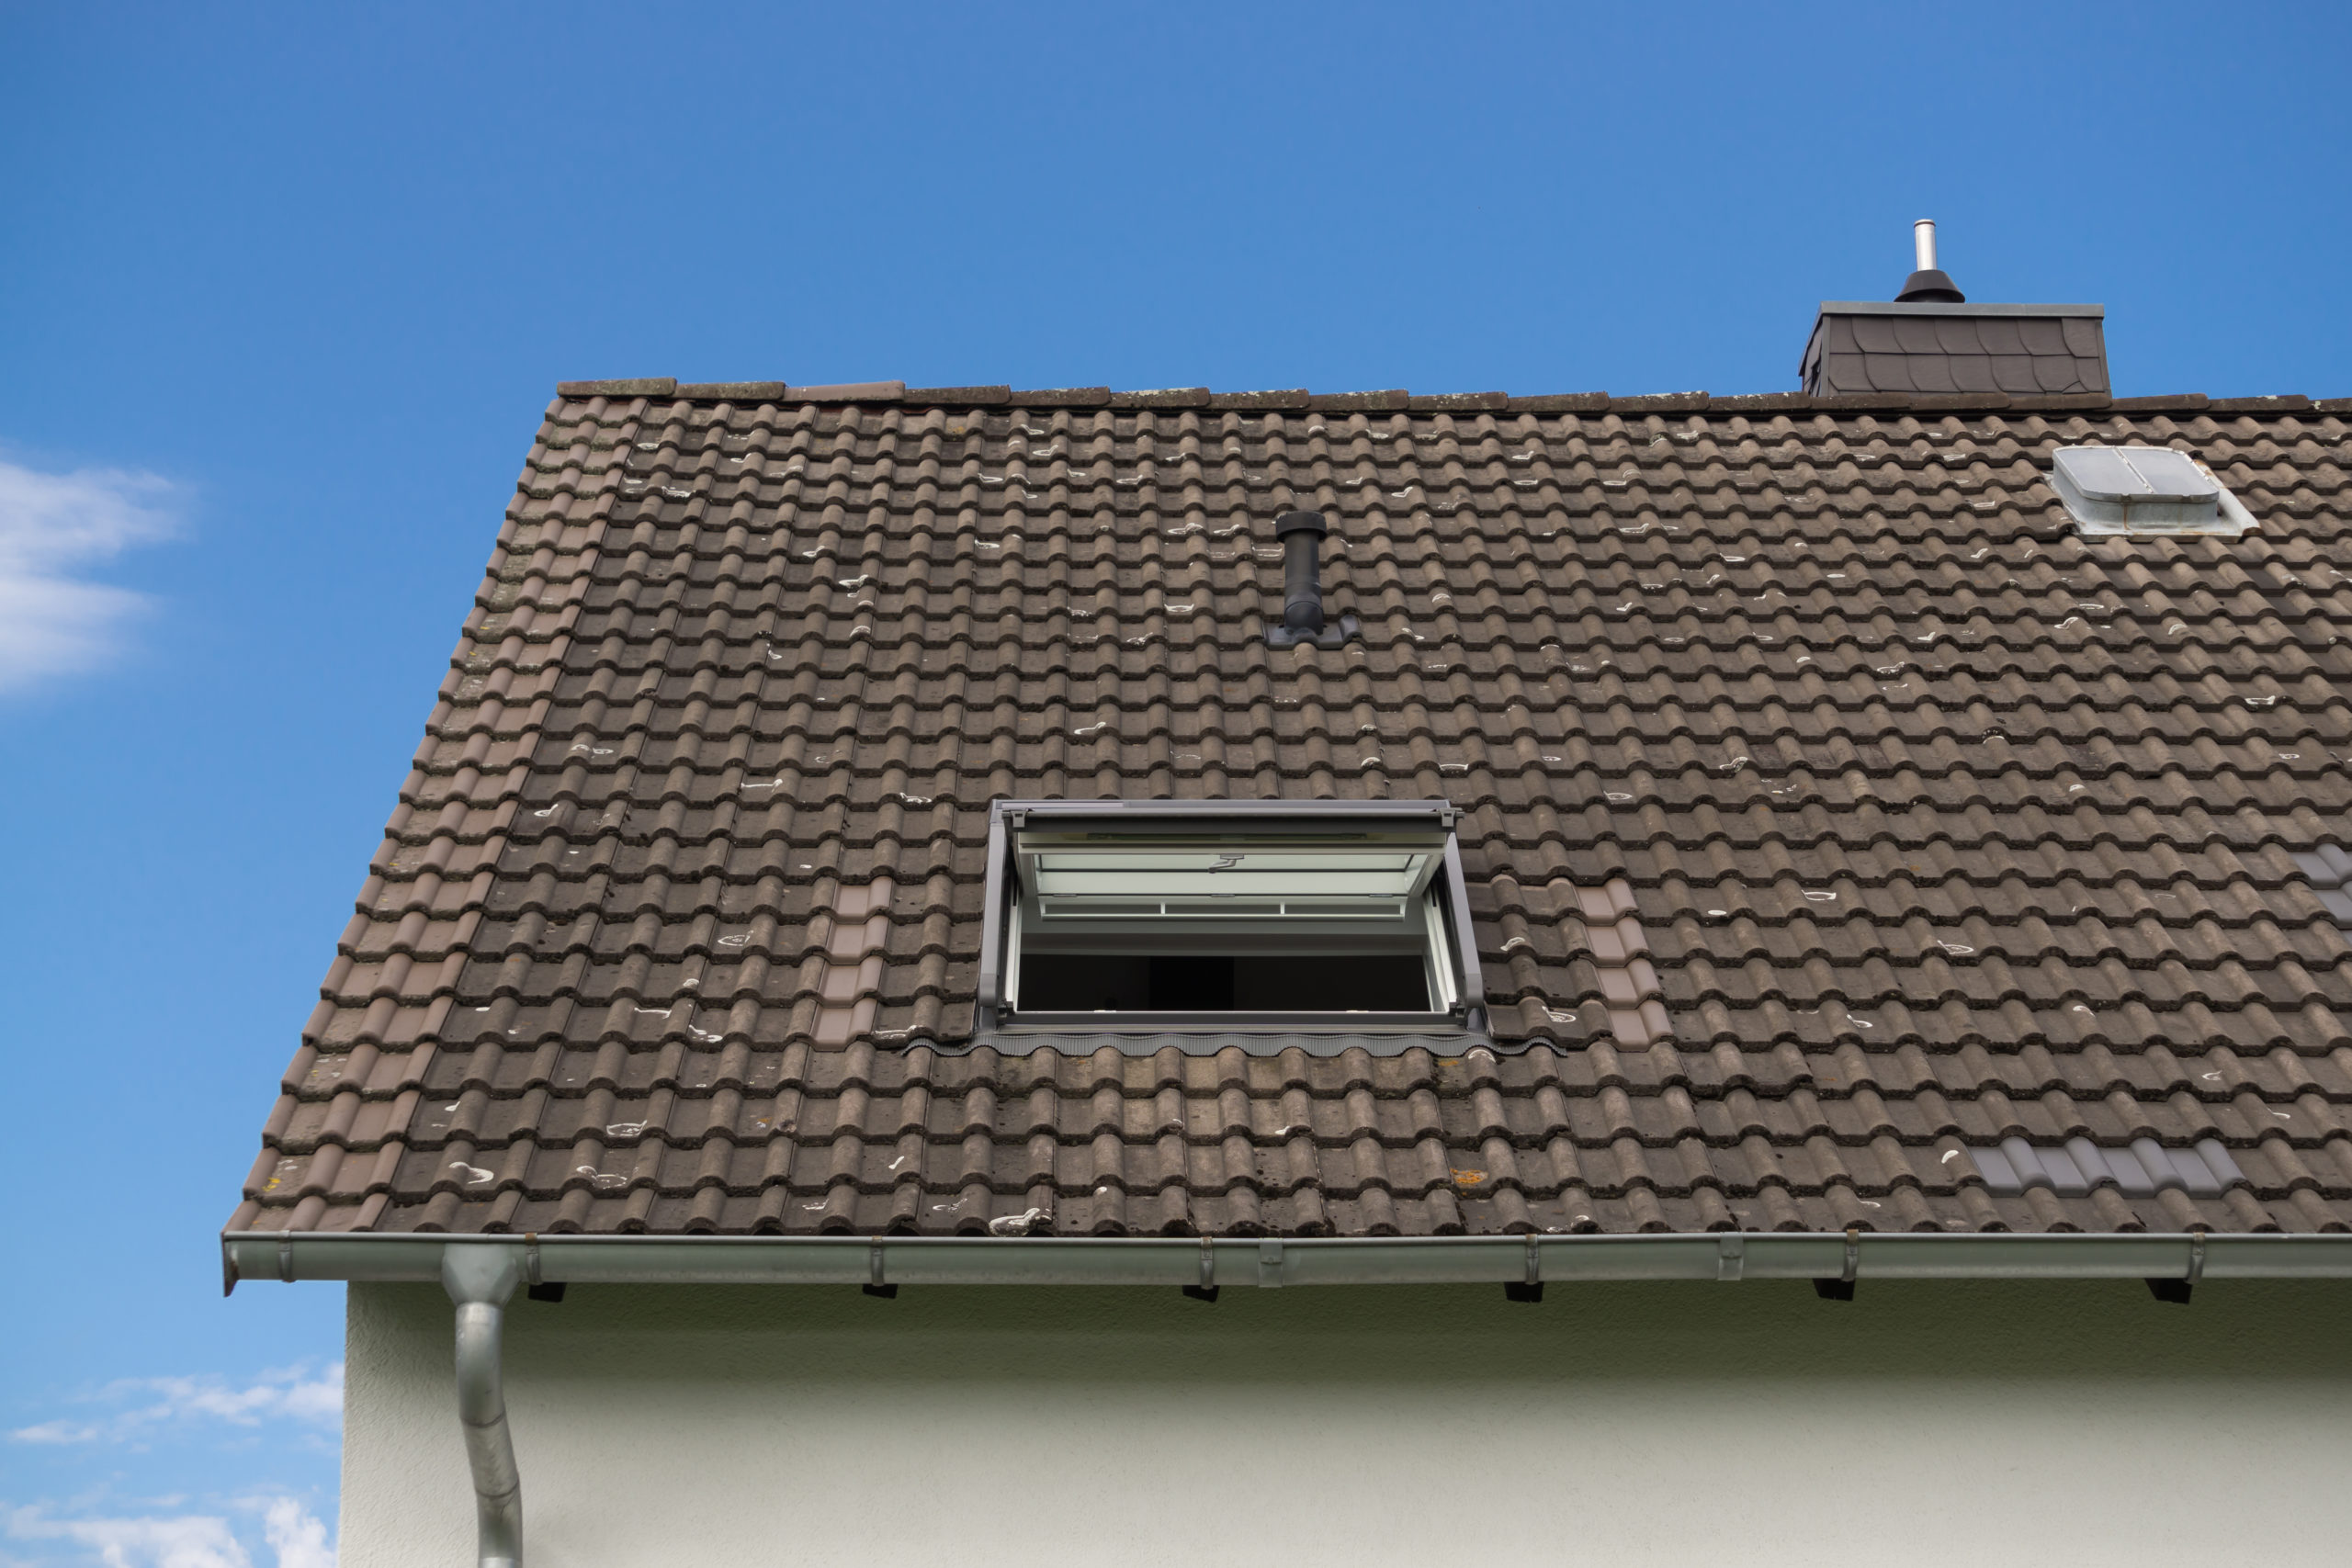 An image of a slowly degrading shingled roof